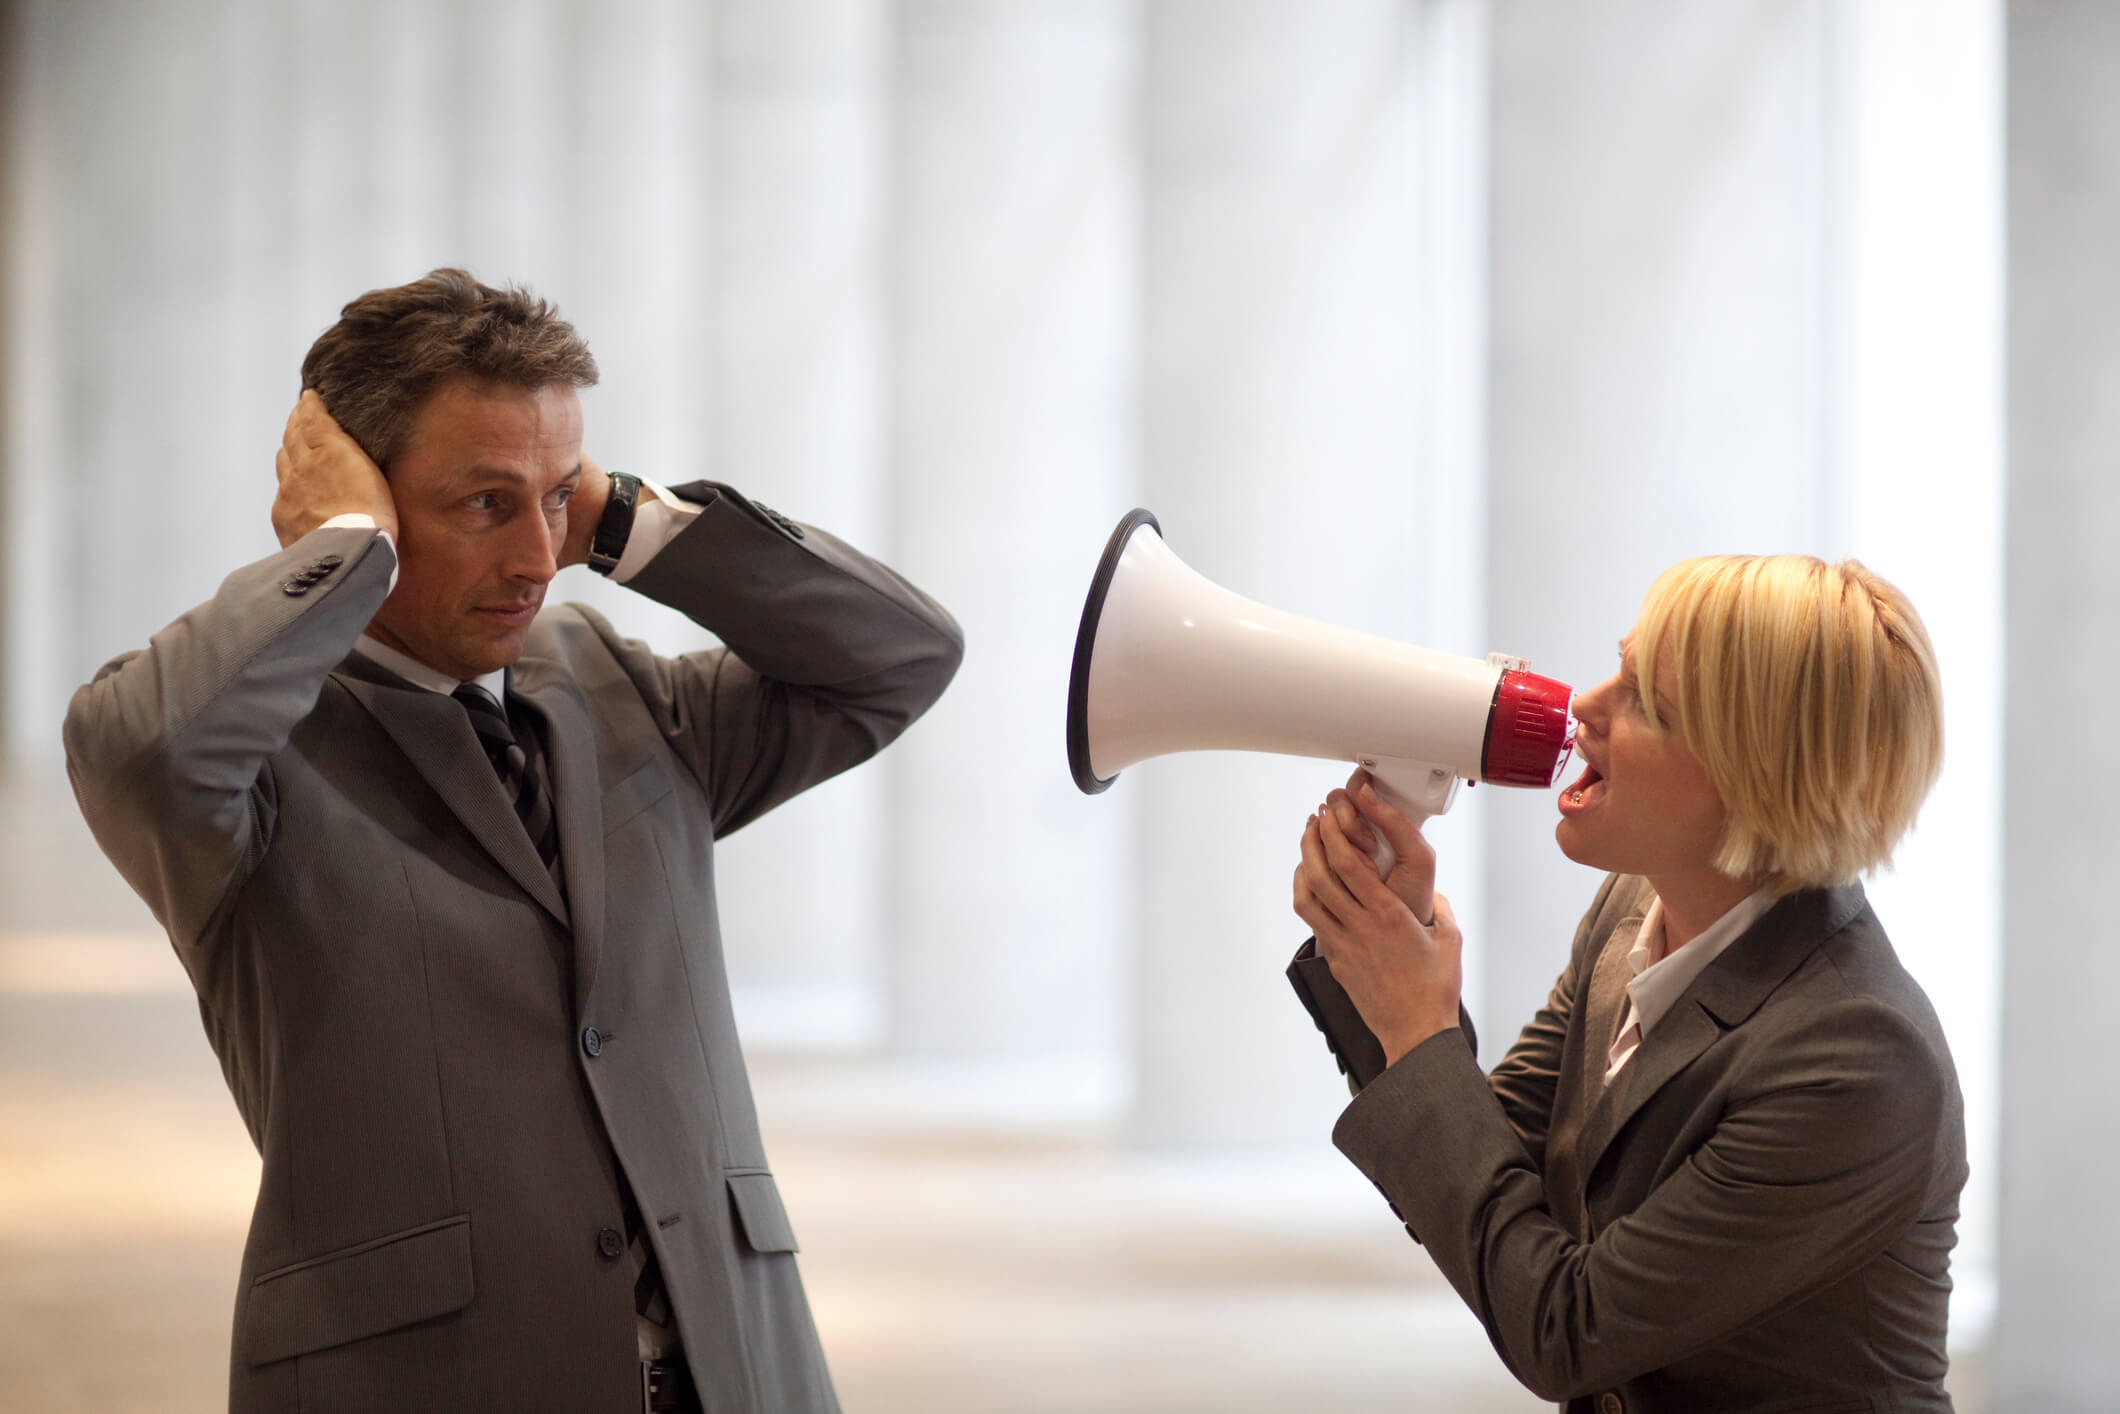 2019 PSM/ORM Survey: Who Is Shouting the Loudest?